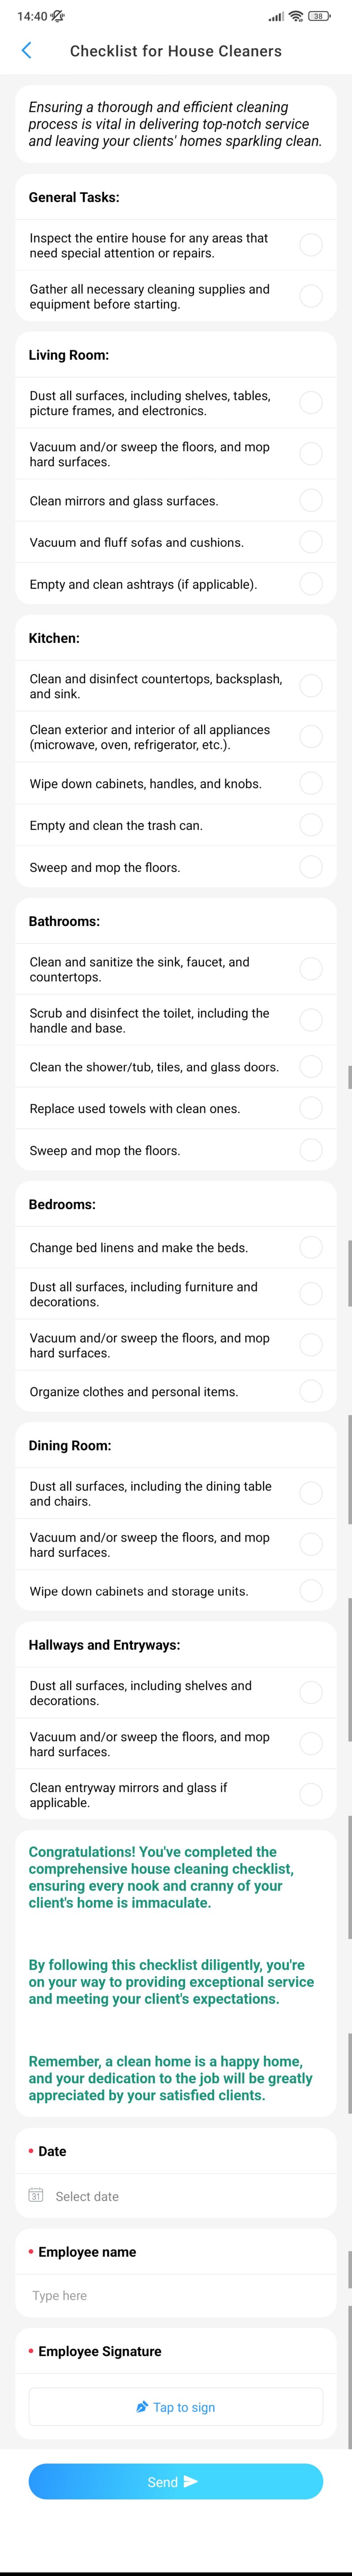 Checklist for House Cleaners screenshot